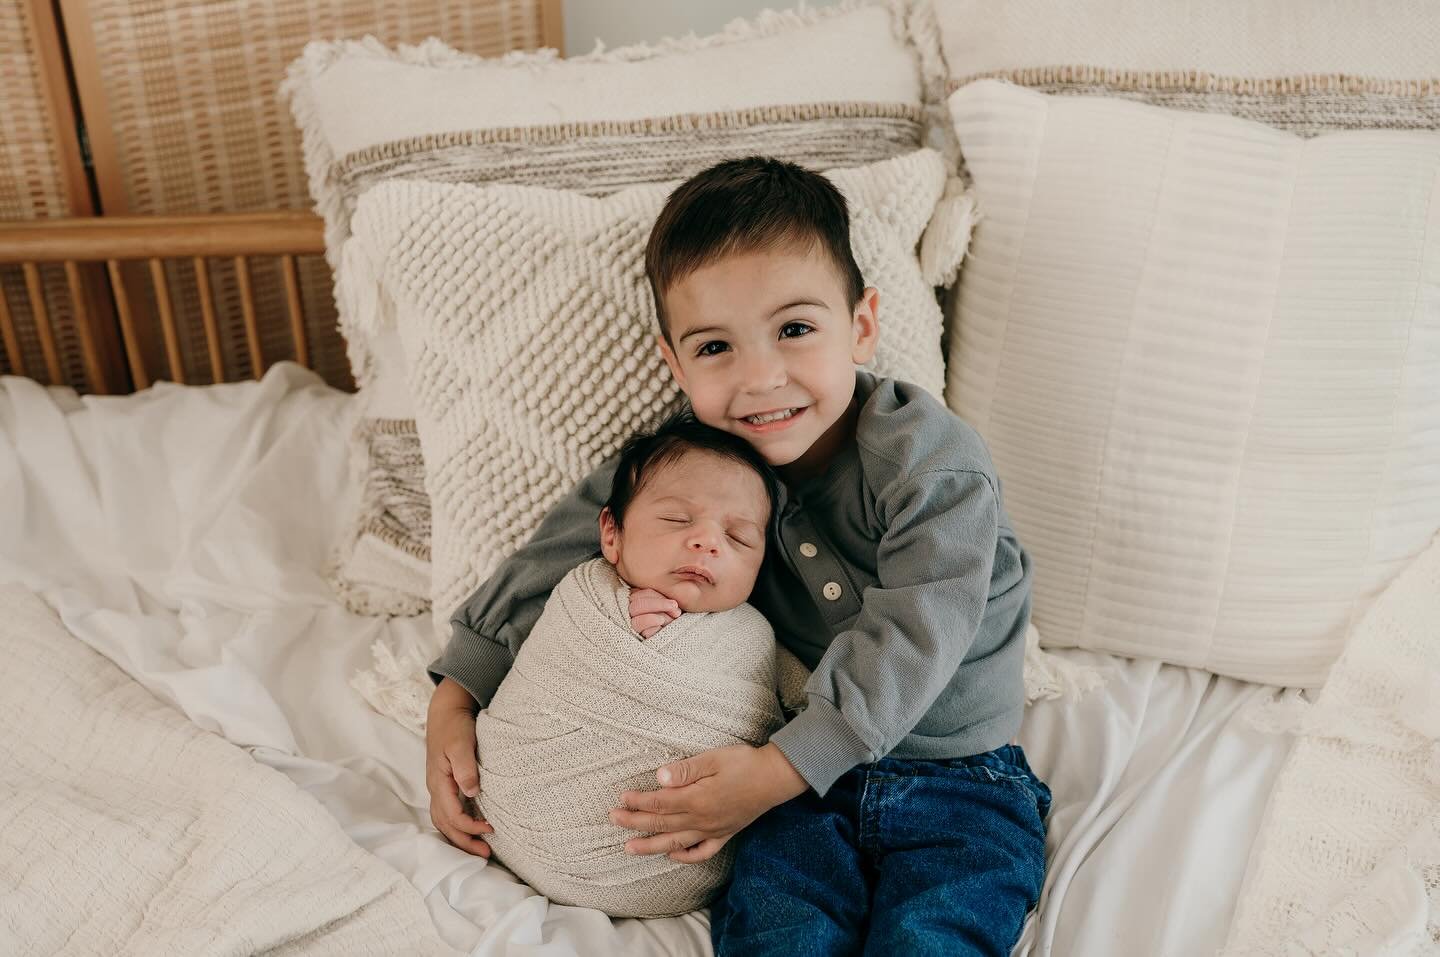 Brooks would love to welcome his sweet baby brother Collins! He simply adores his new partner for life!